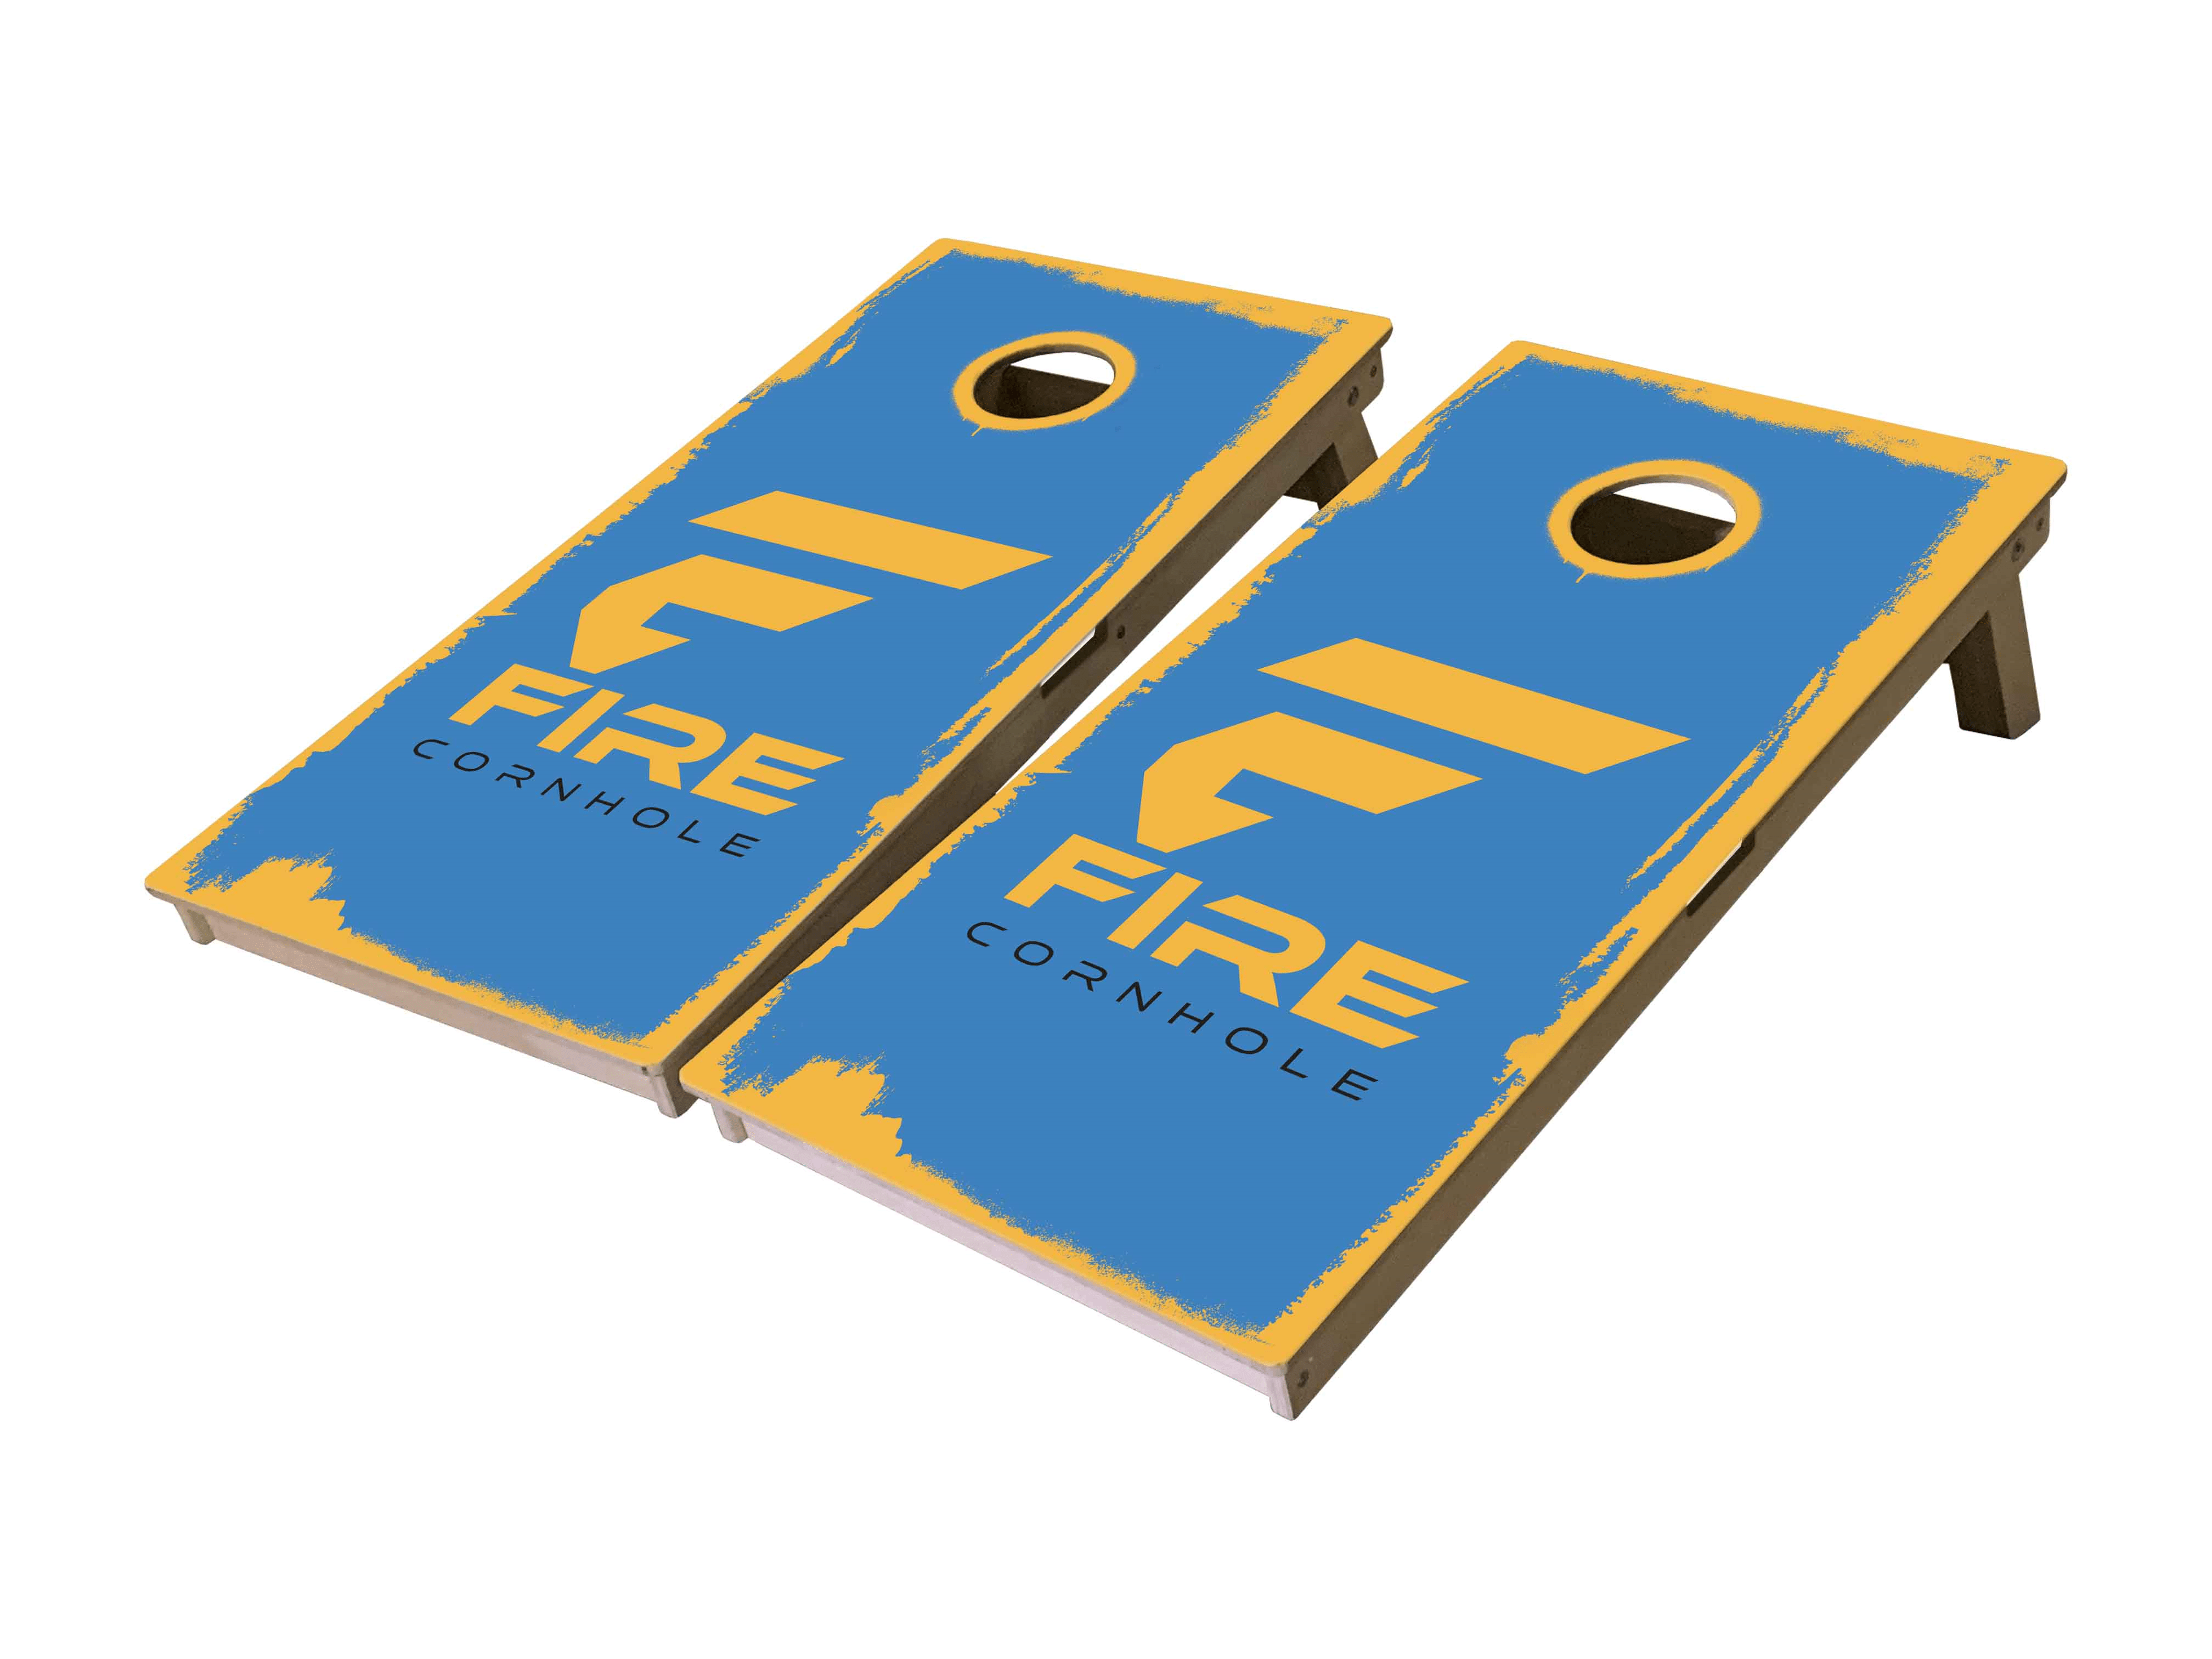 Fire Cornhole boards in blue and yellow